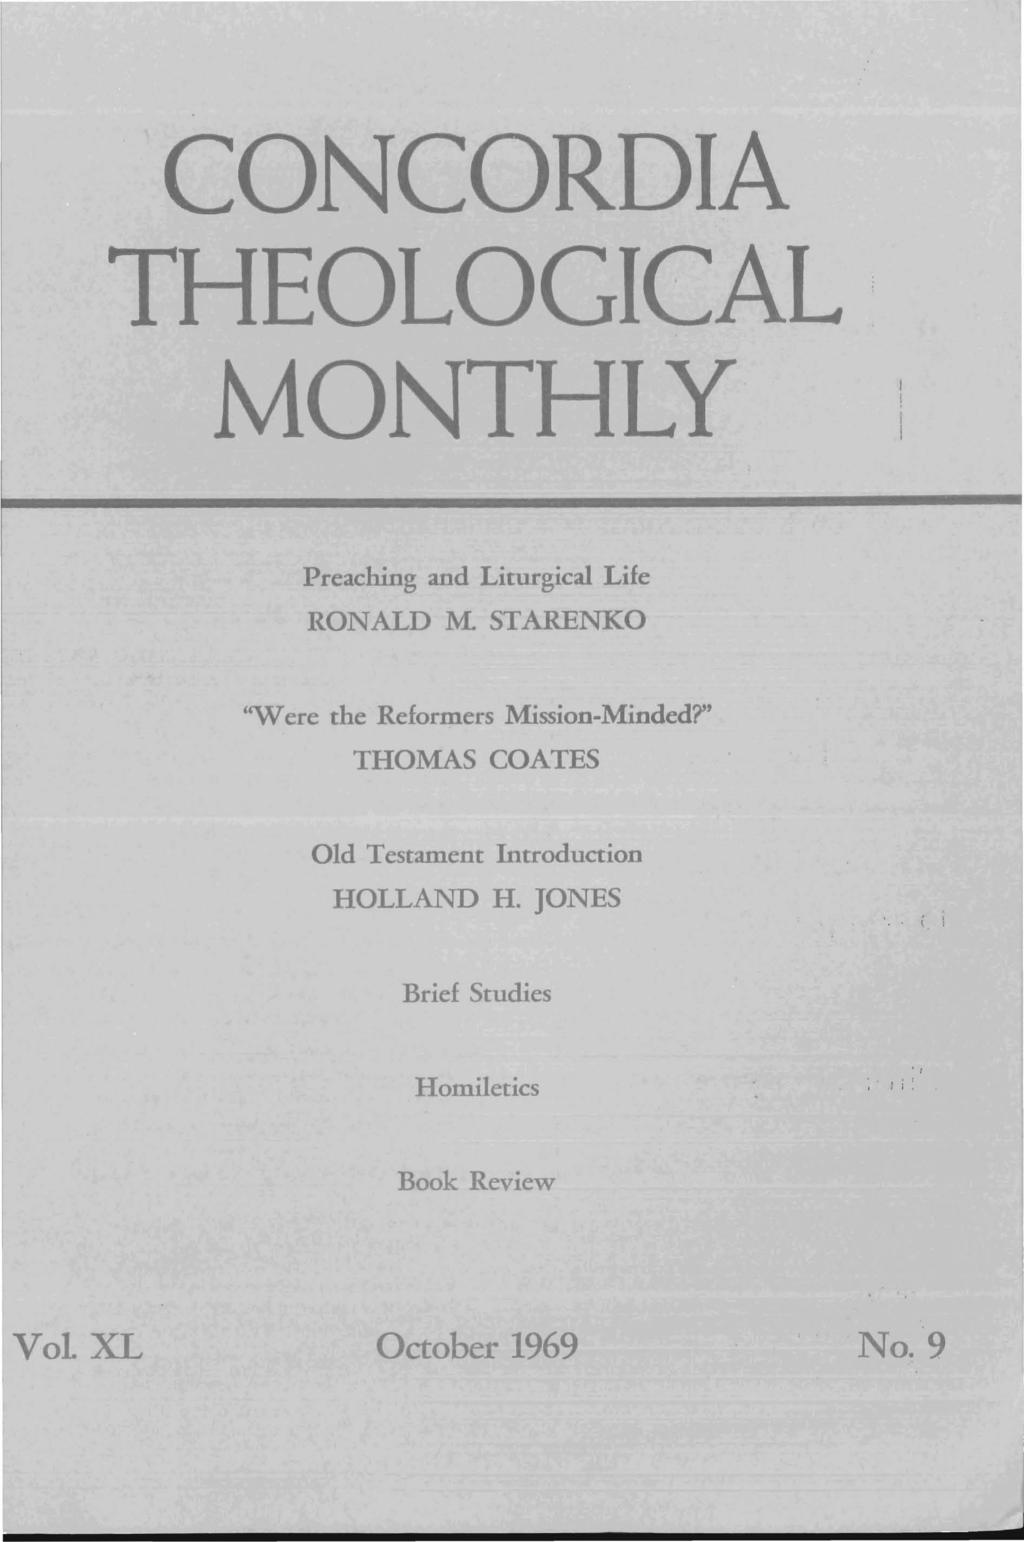 d CONCORDIA THEOLOGICAL MONTHLY Preaching and Liturgical Life RONALD M STARENKO "Were the Reformers Mission-Minded?